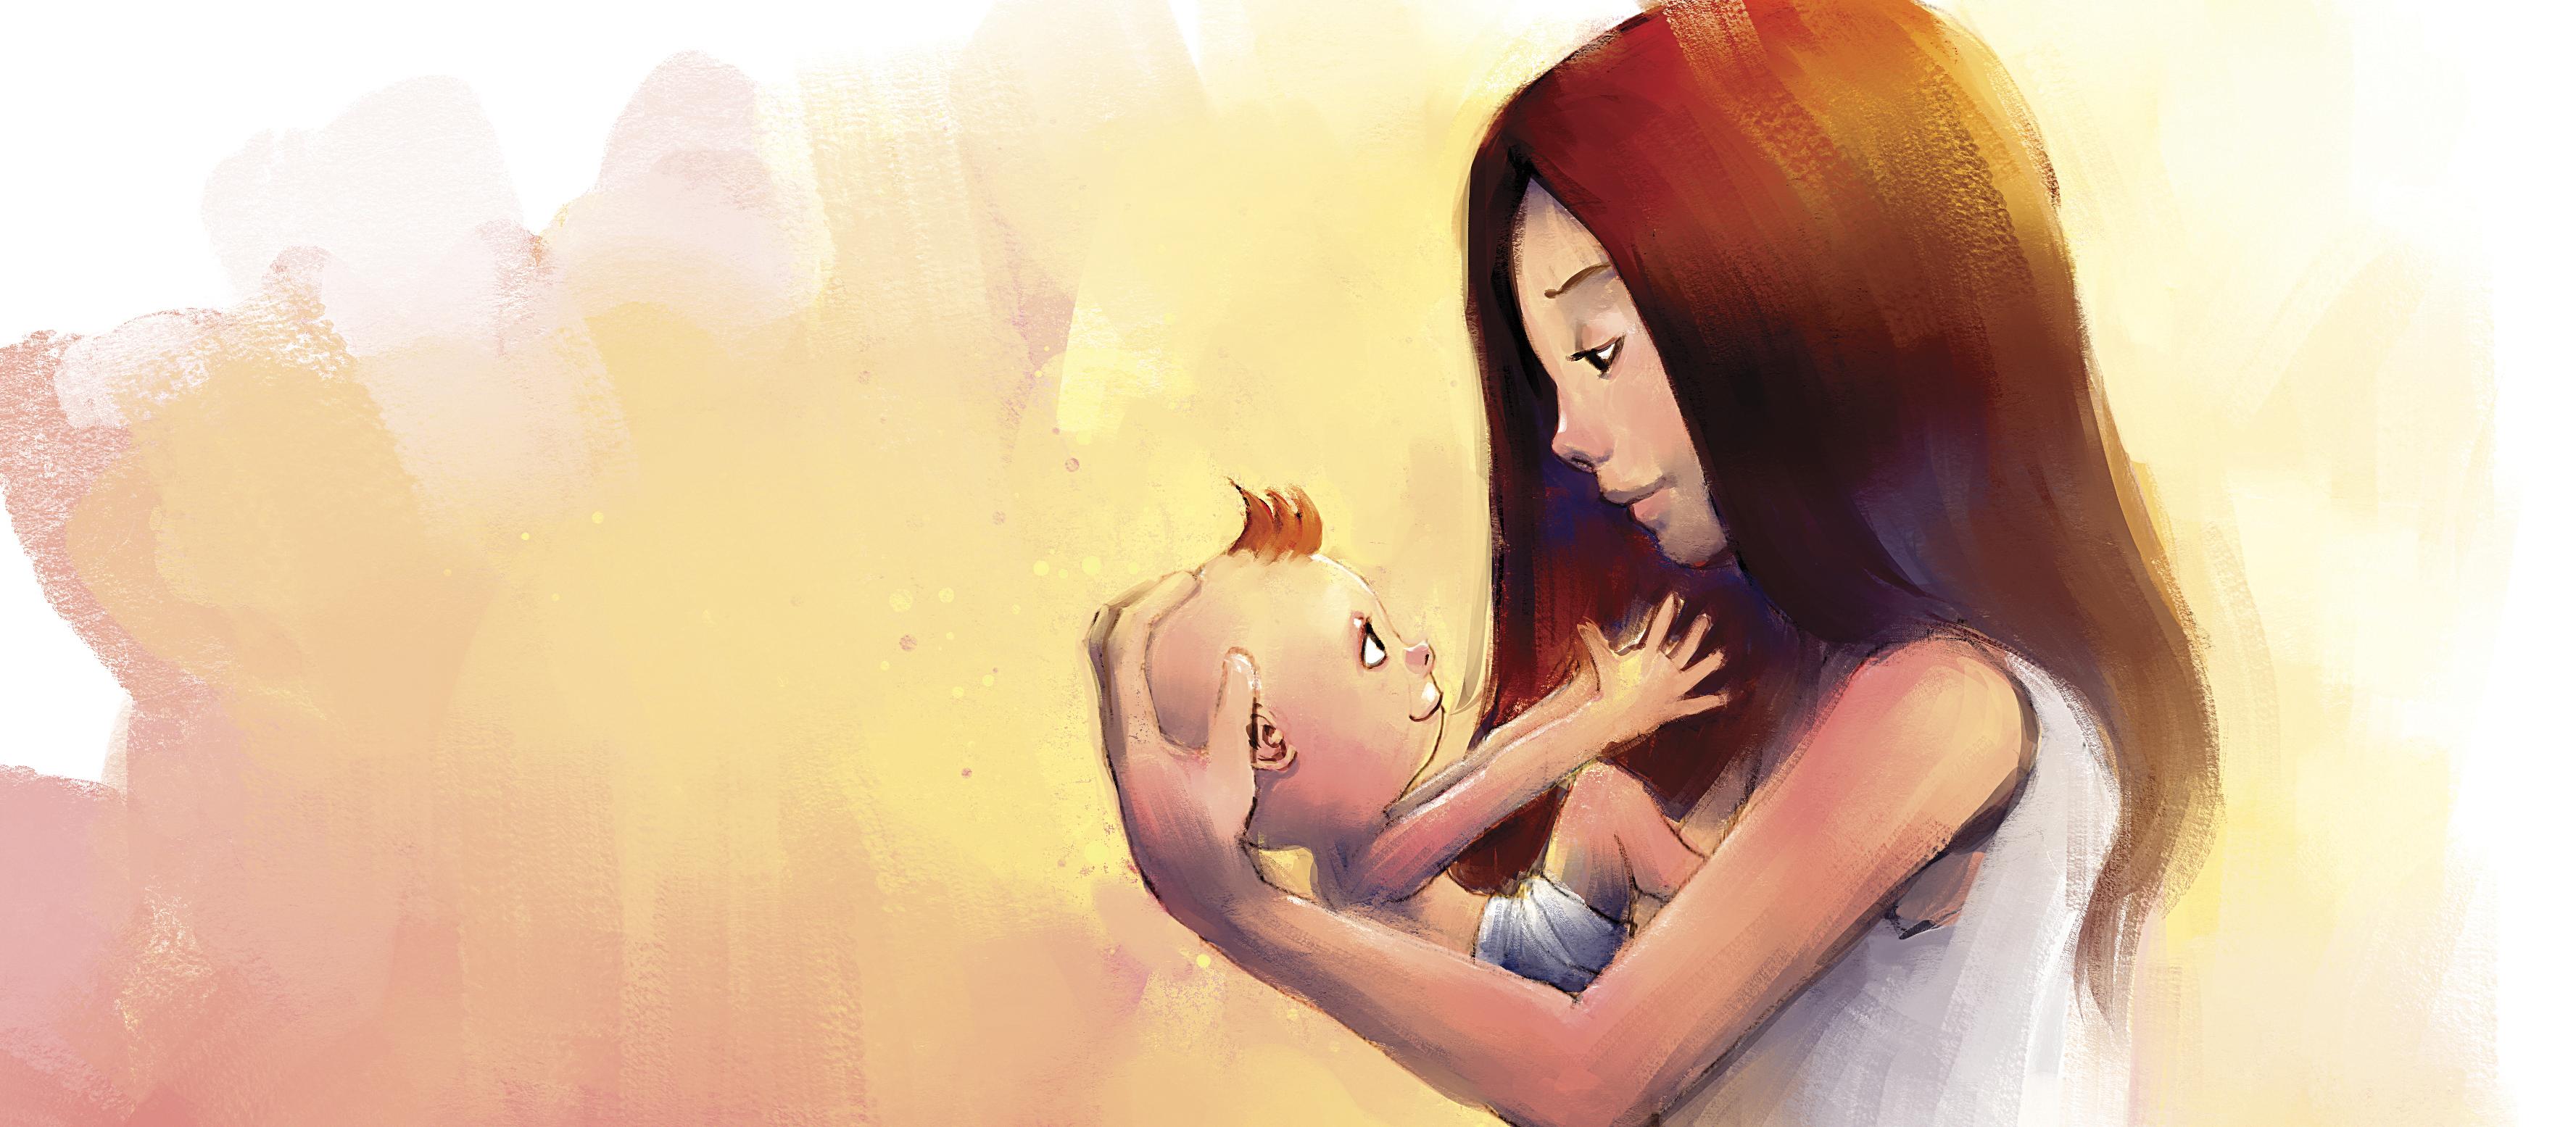 Mother and baby boy illustration